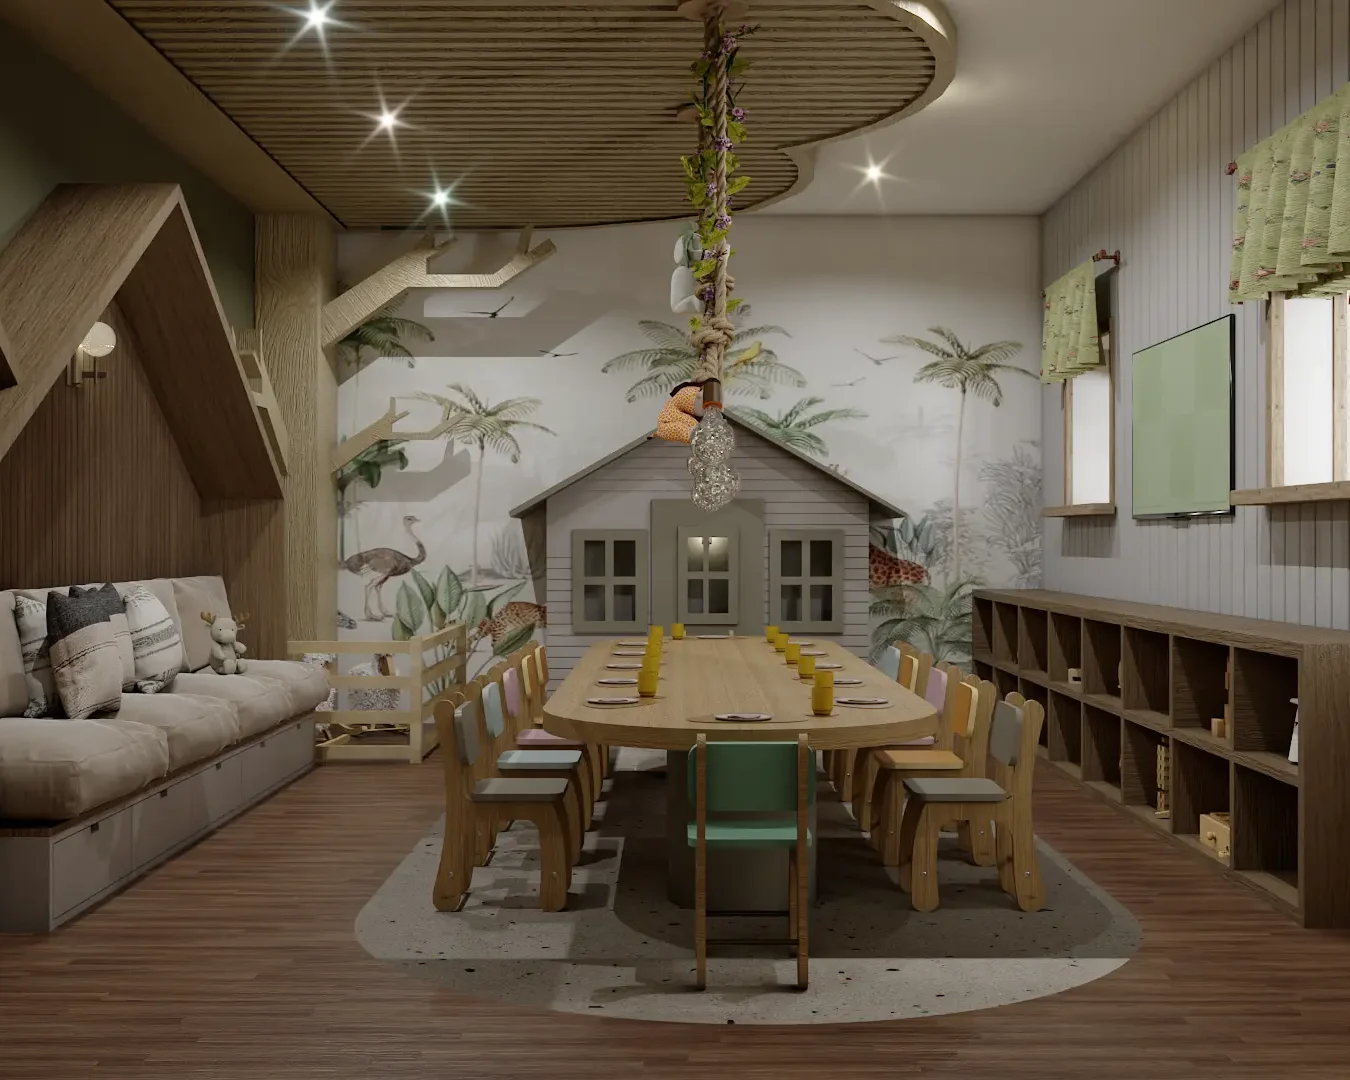 Children's dining area resembling a treehouse with wooden furniture and playful jungle motifs, designed by Debora, an online interior design service based in New York City.